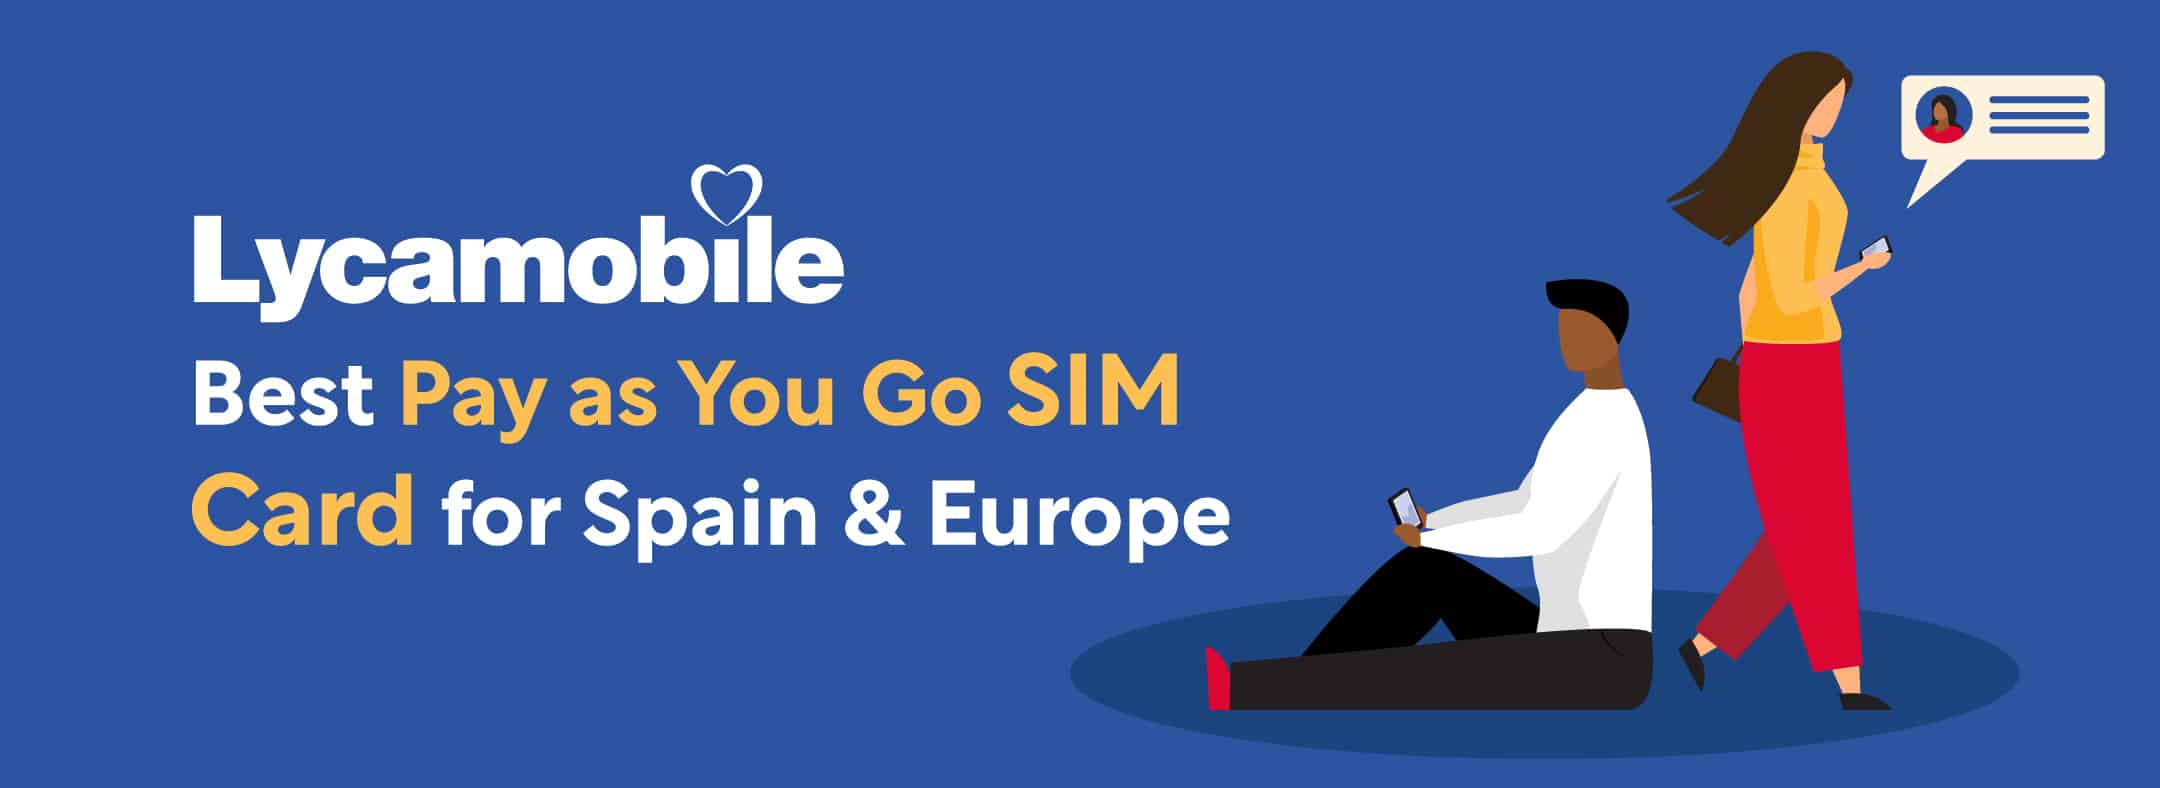 Lycamobile - Best Pay as You Go SIM Card for Spain & Europe